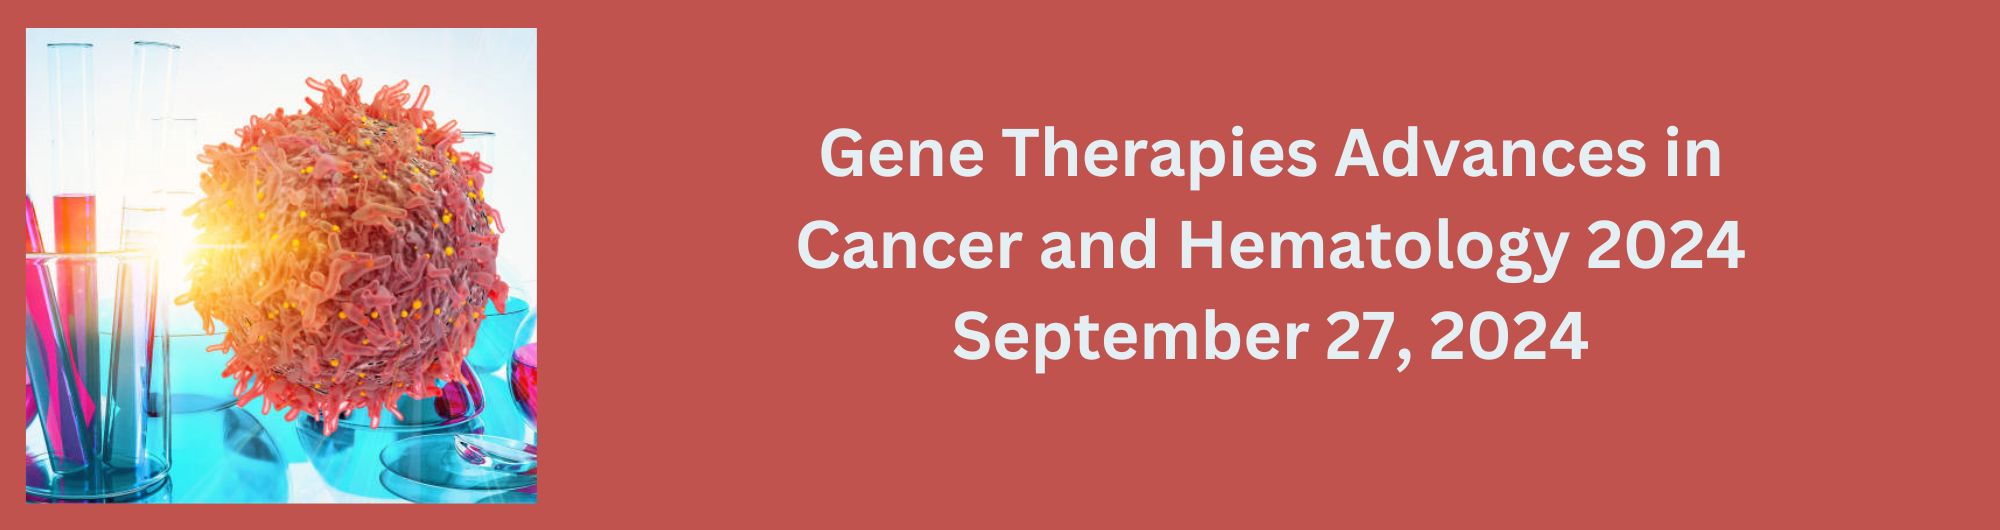 Gene Therapies Advances in Cancer and Hematology 2024 Banner